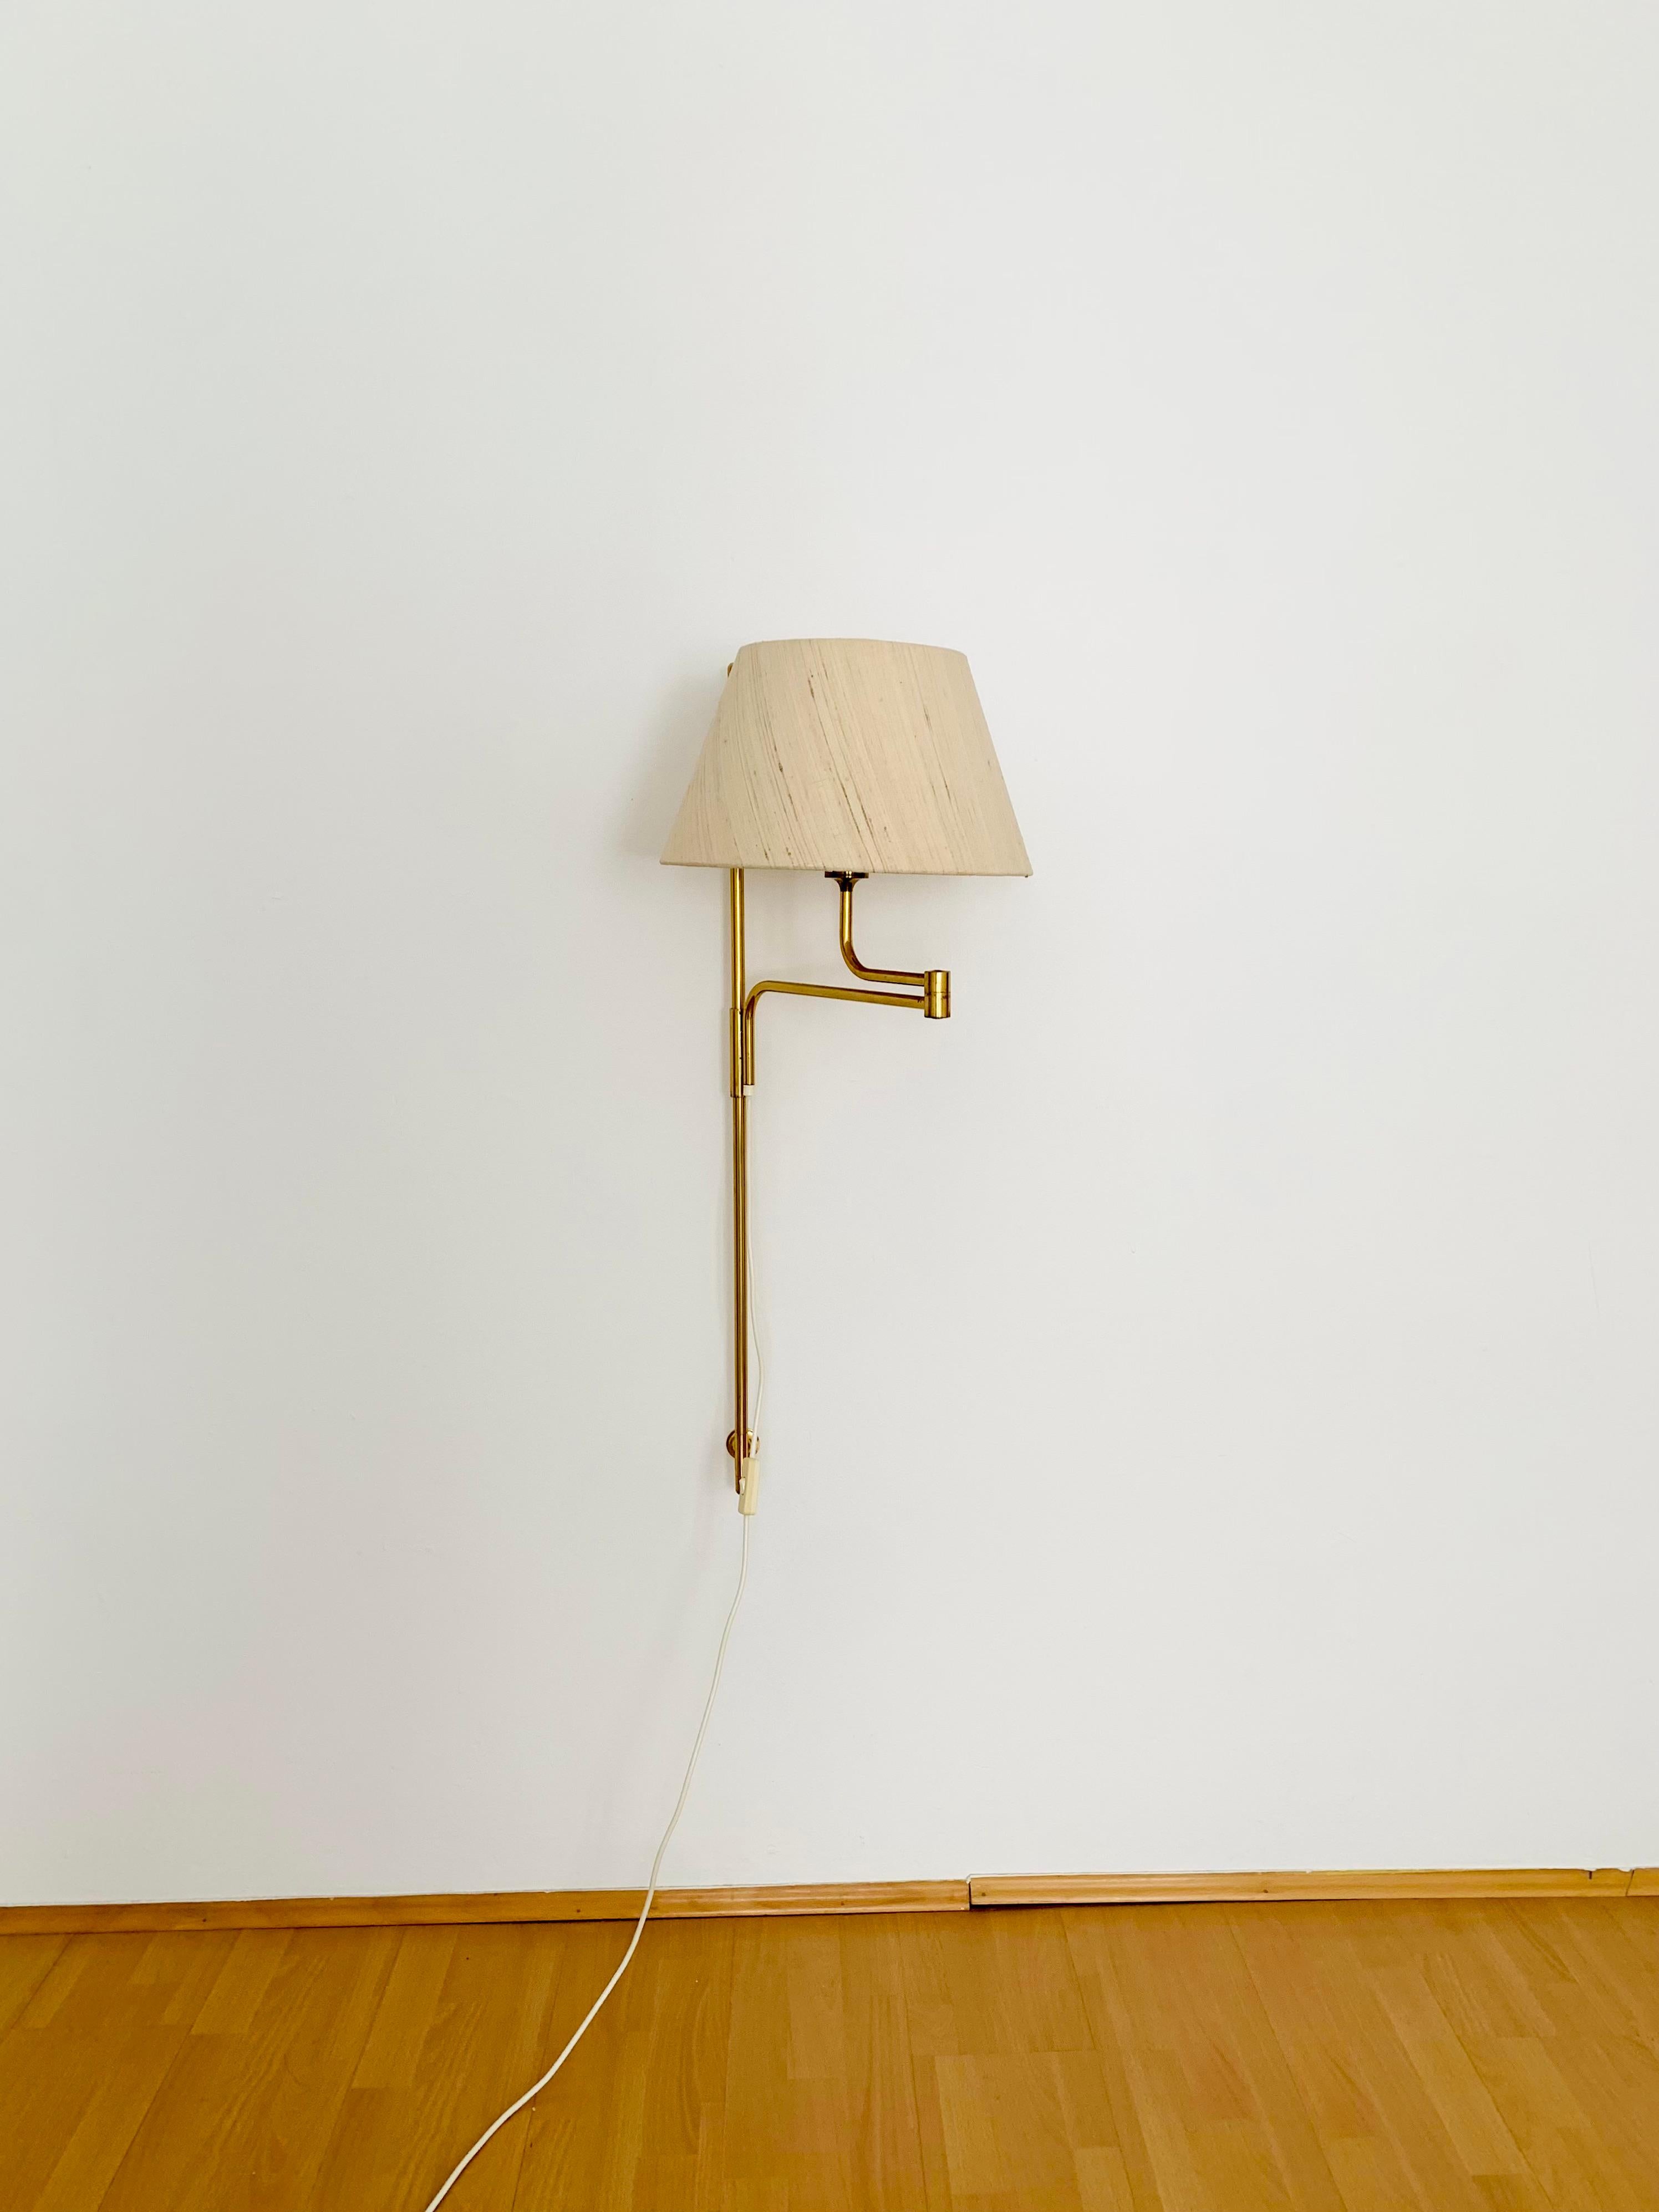 Very nice, height-adjustable brass wall lamp from the 1970s.
The design and the very beautiful details create a very noble and pleasant light.
The lamp creates a very cozy atmosphere and is of very high quality.
Infinitely adjustable.

Design: